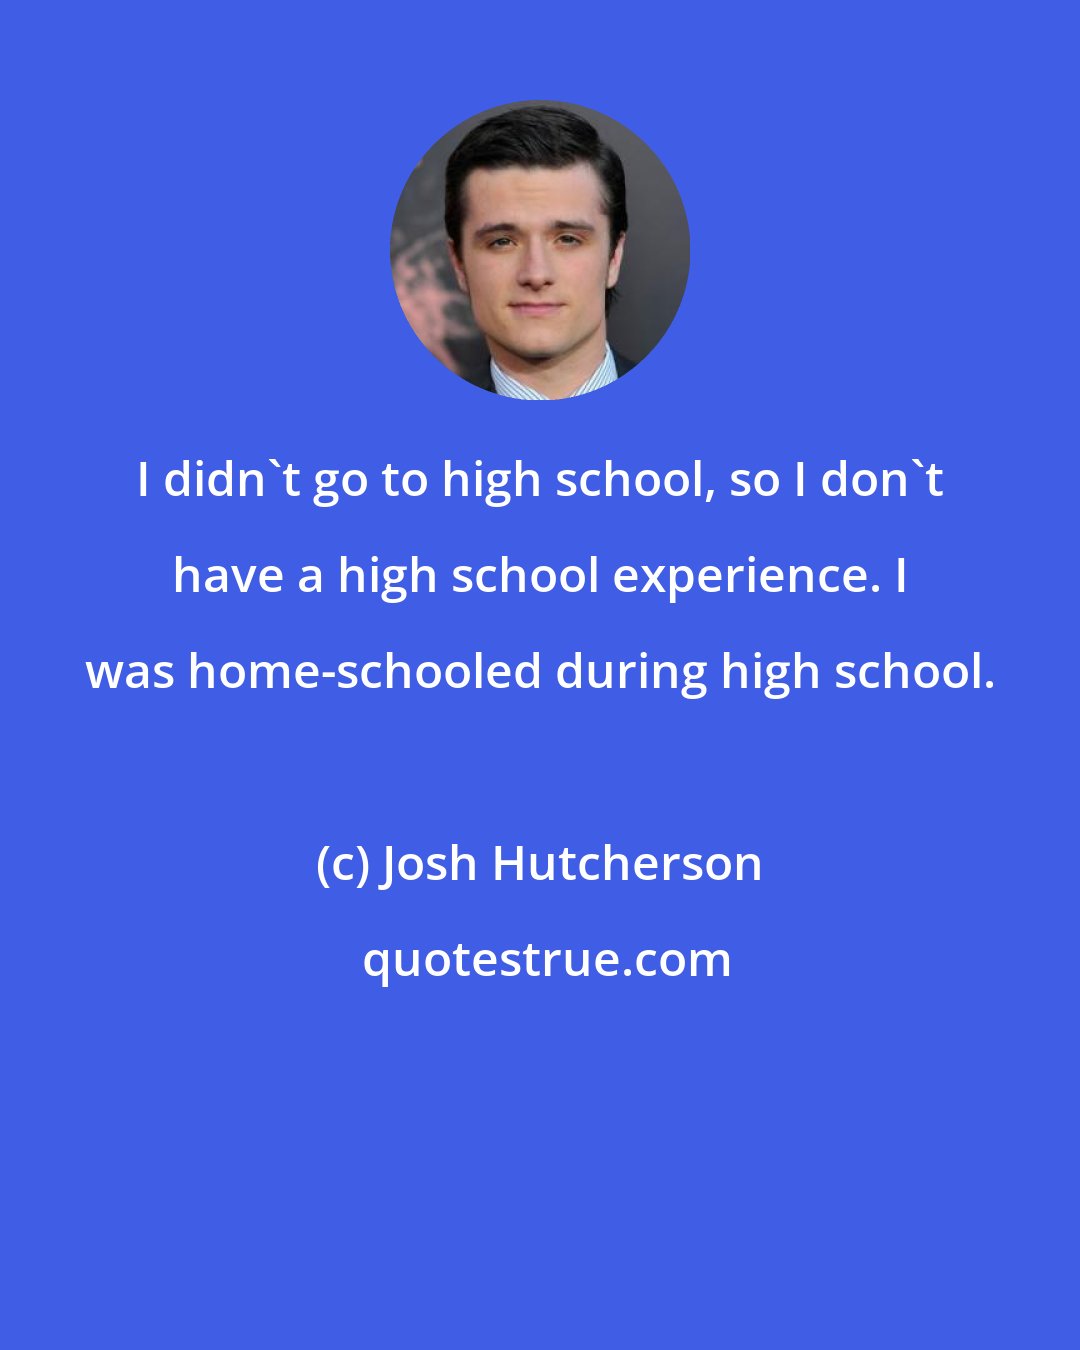 Josh Hutcherson: I didn't go to high school, so I don't have a high school experience. I was home-schooled during high school.